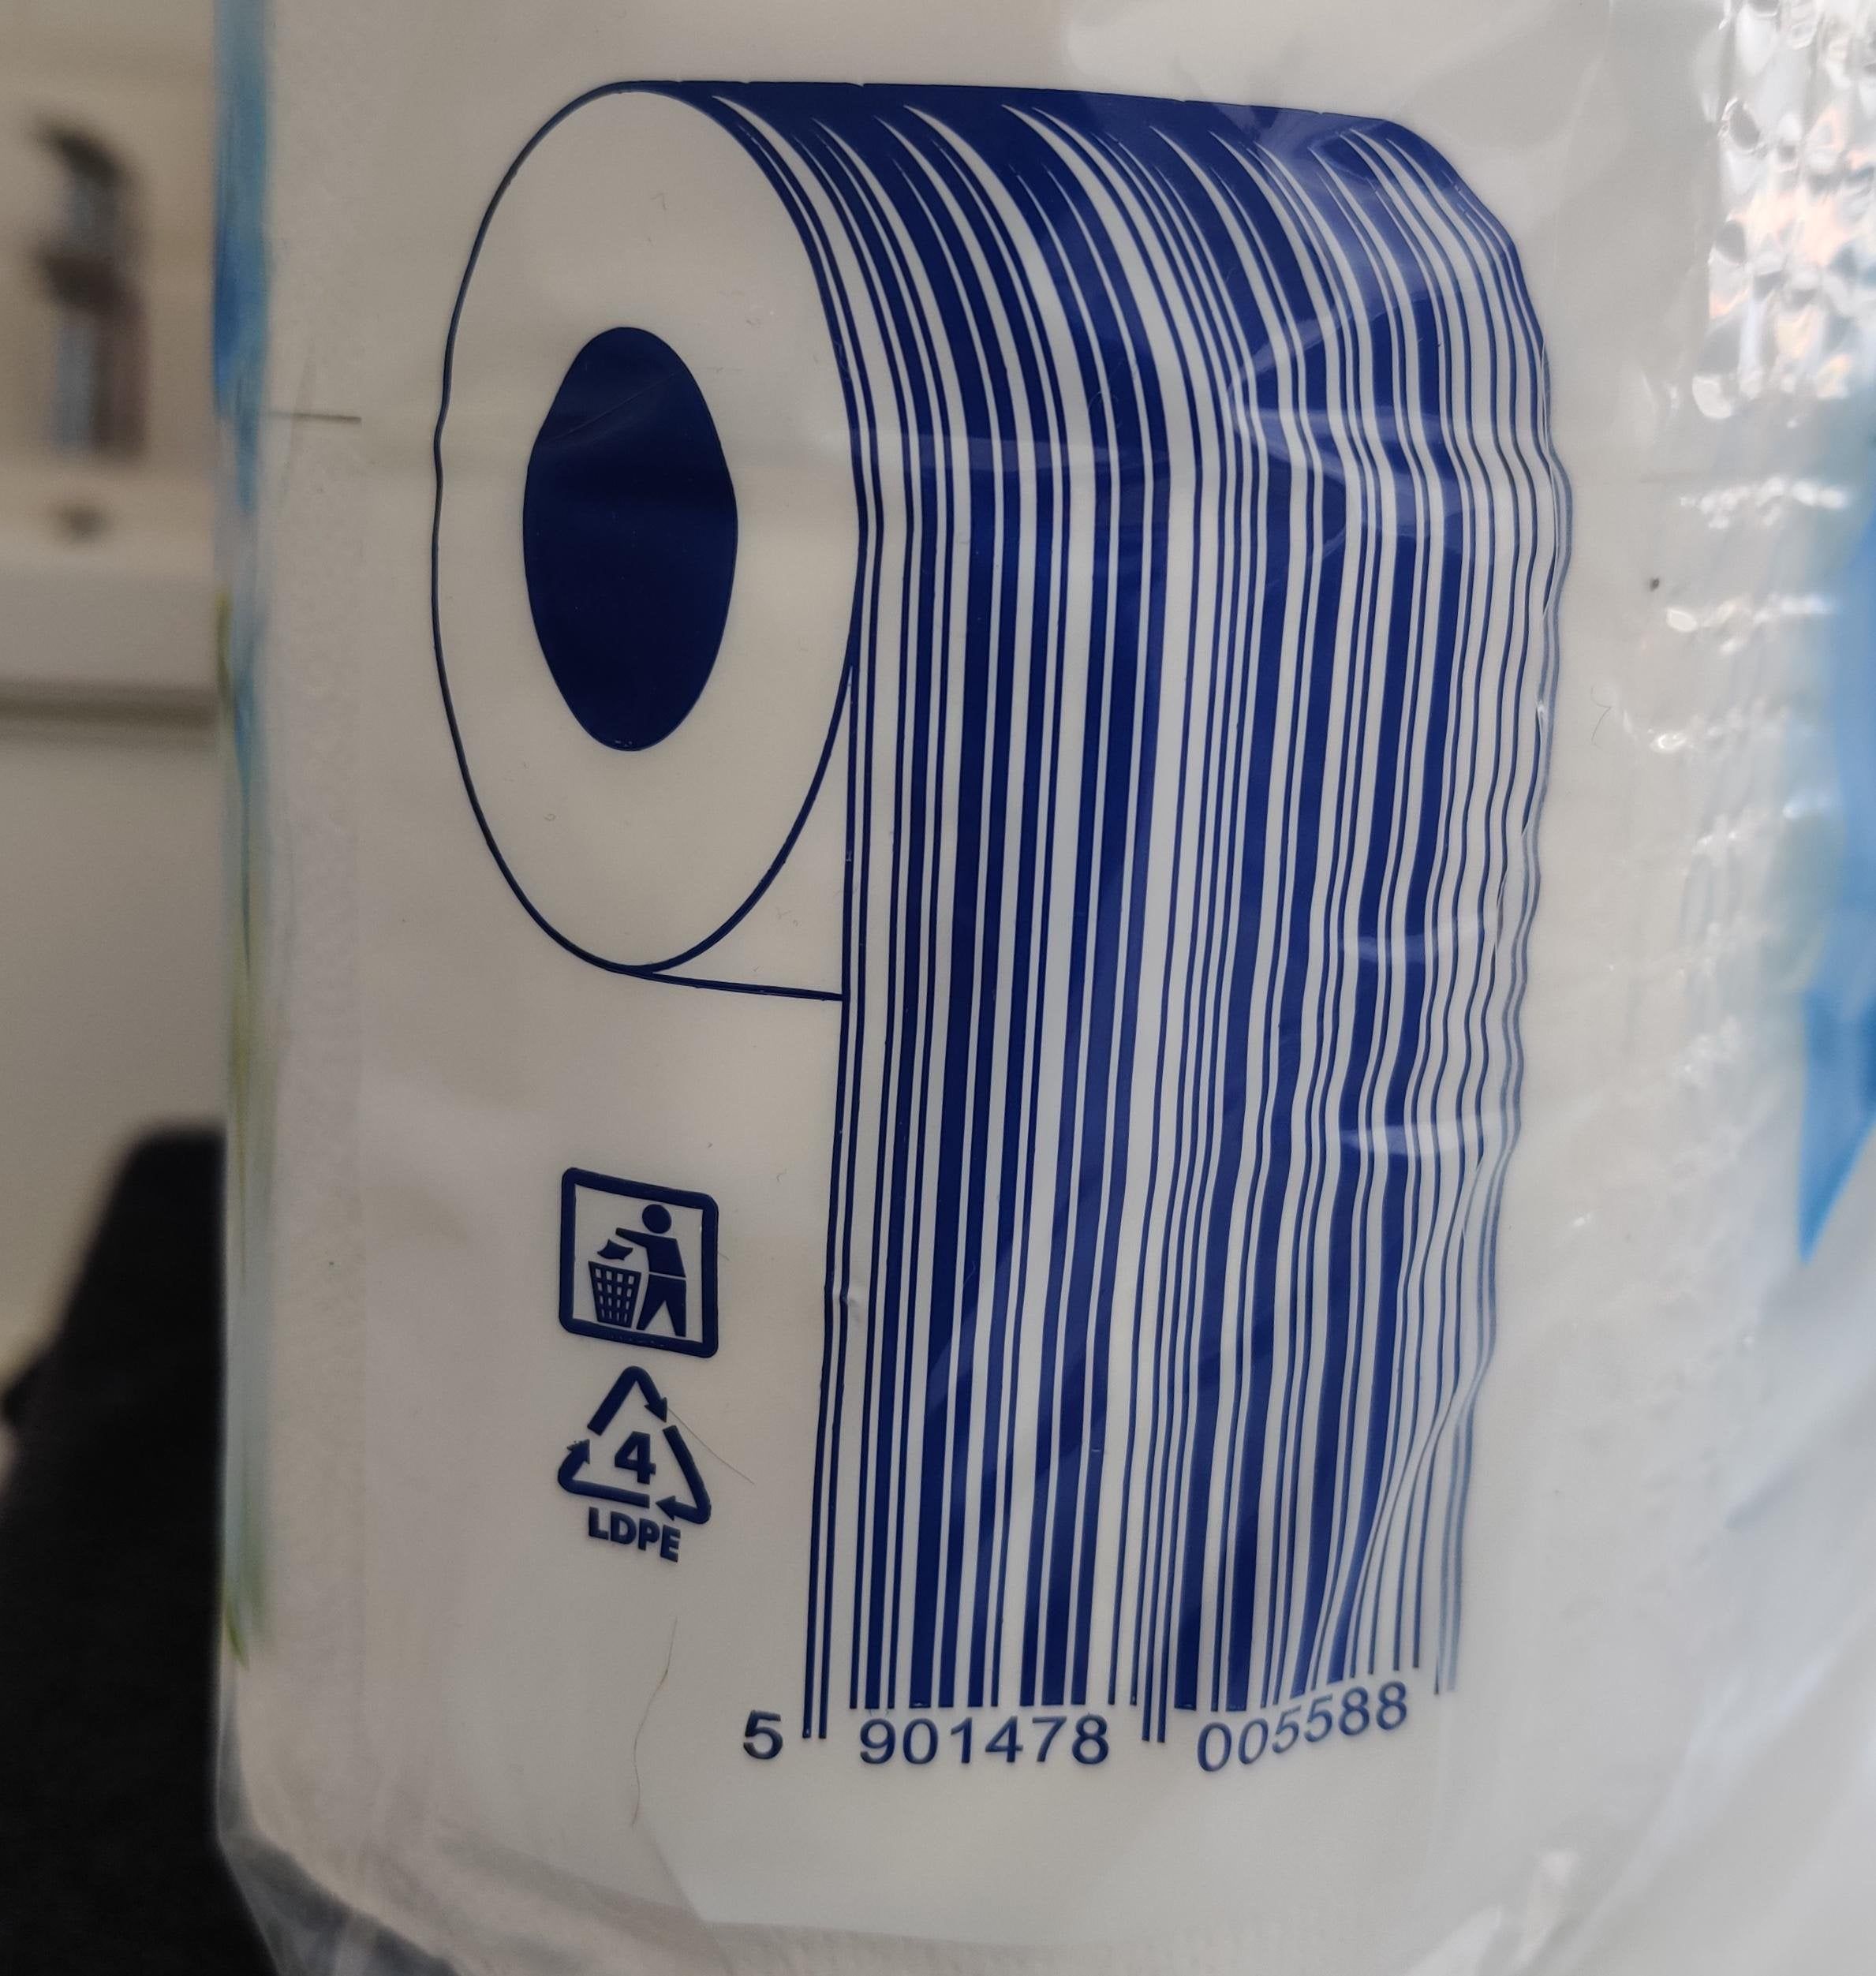 That is how you make a barcode for toilet paper